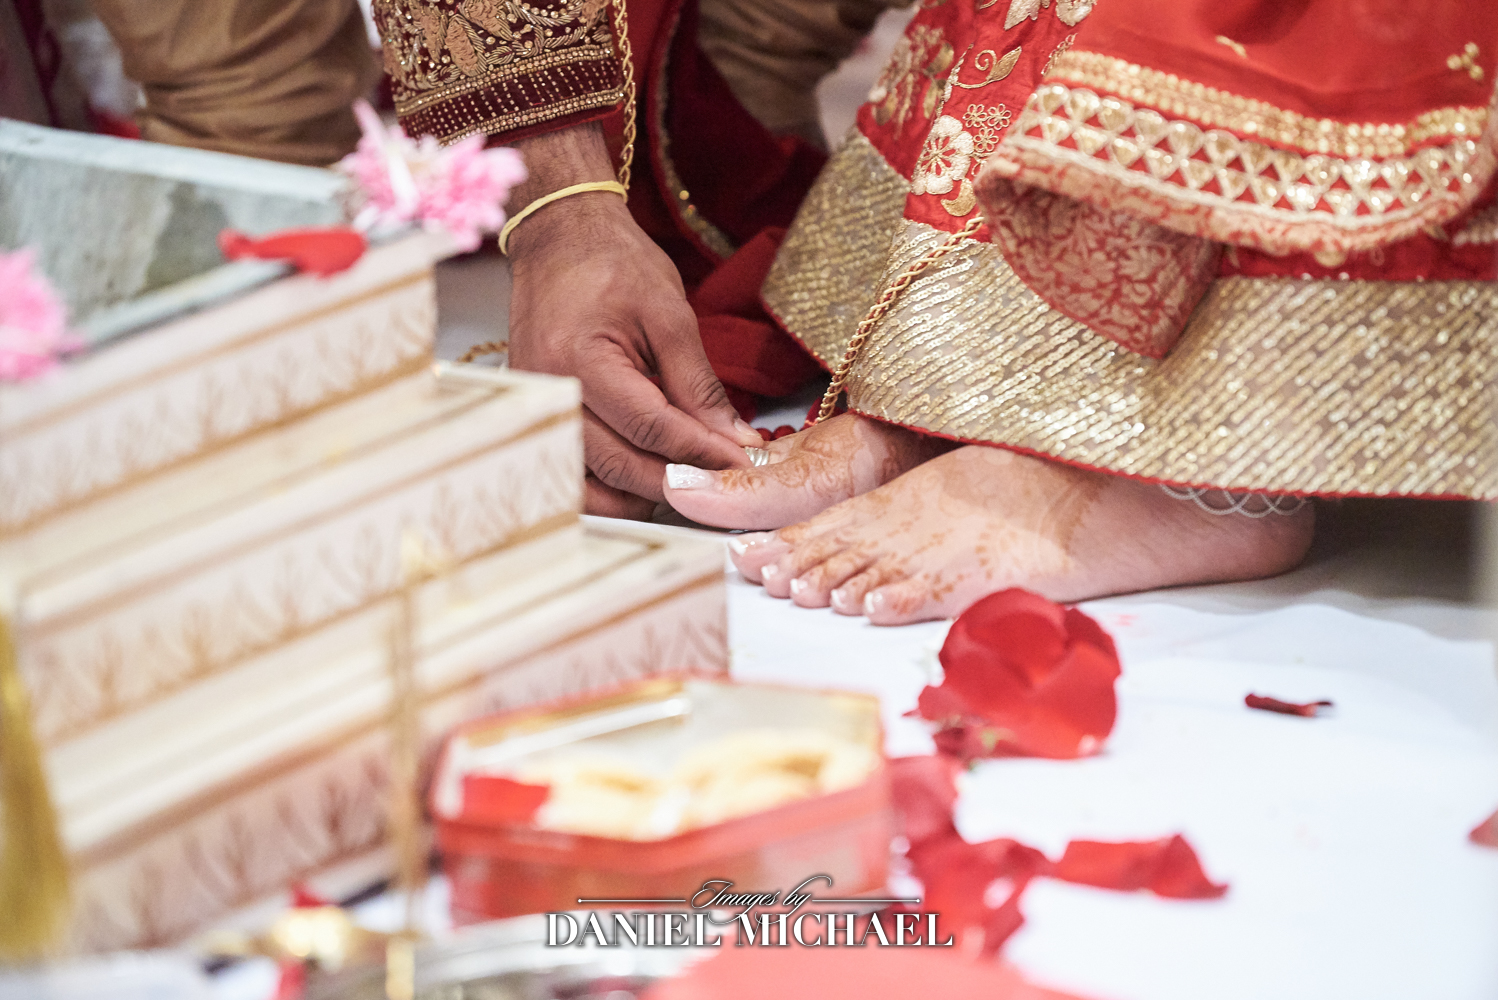 South Asian bride receiving Metti during her wedding ceremony